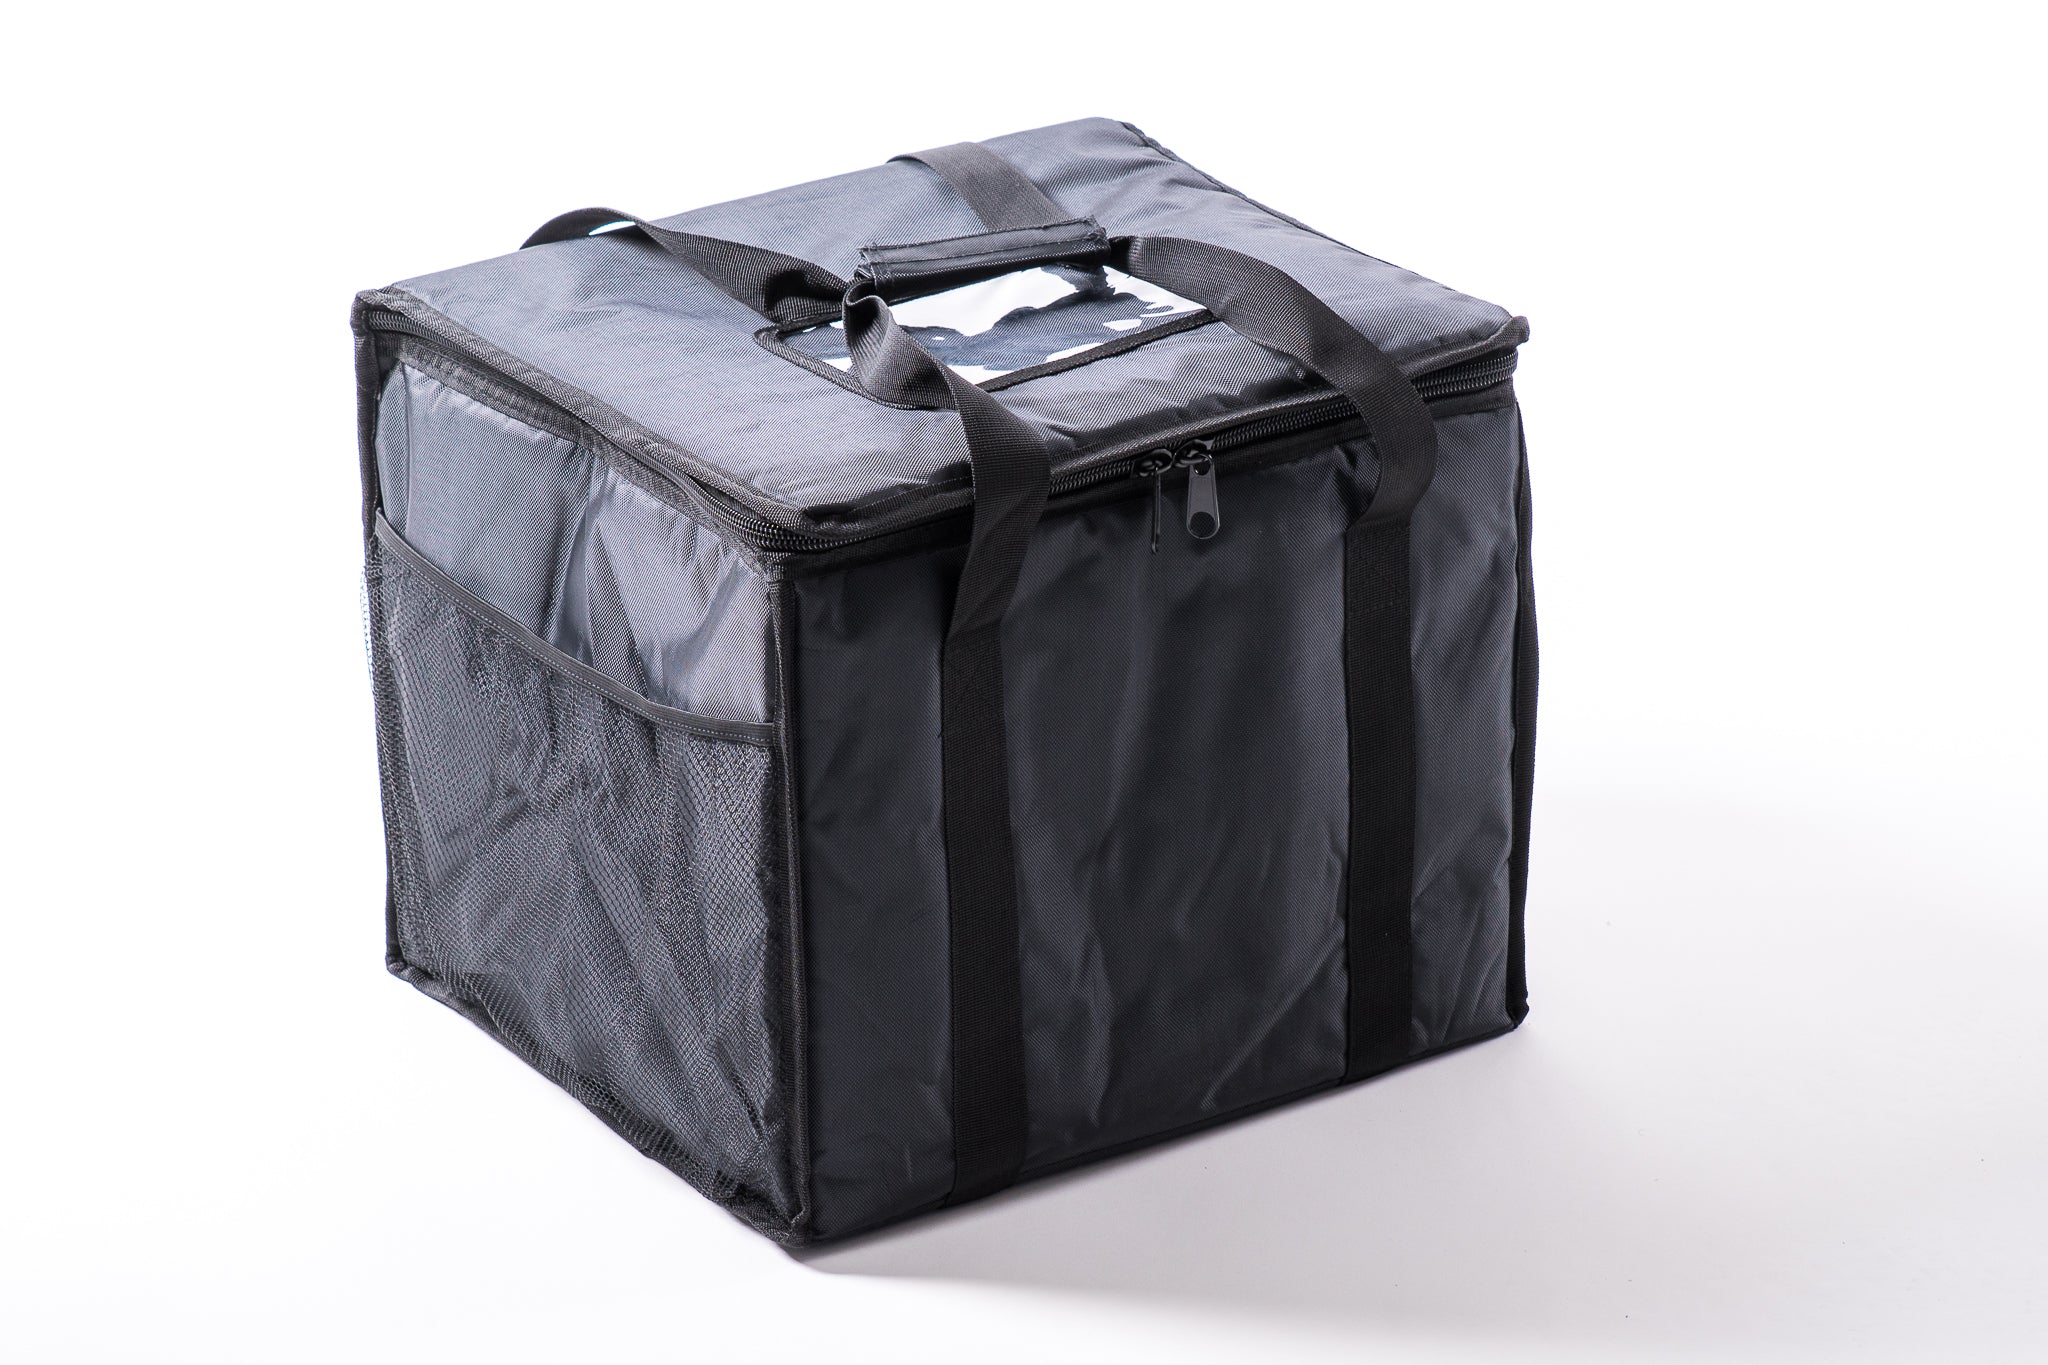 Black Insulated Delivery Bag, Model: packpr44, Size: 18X10X18